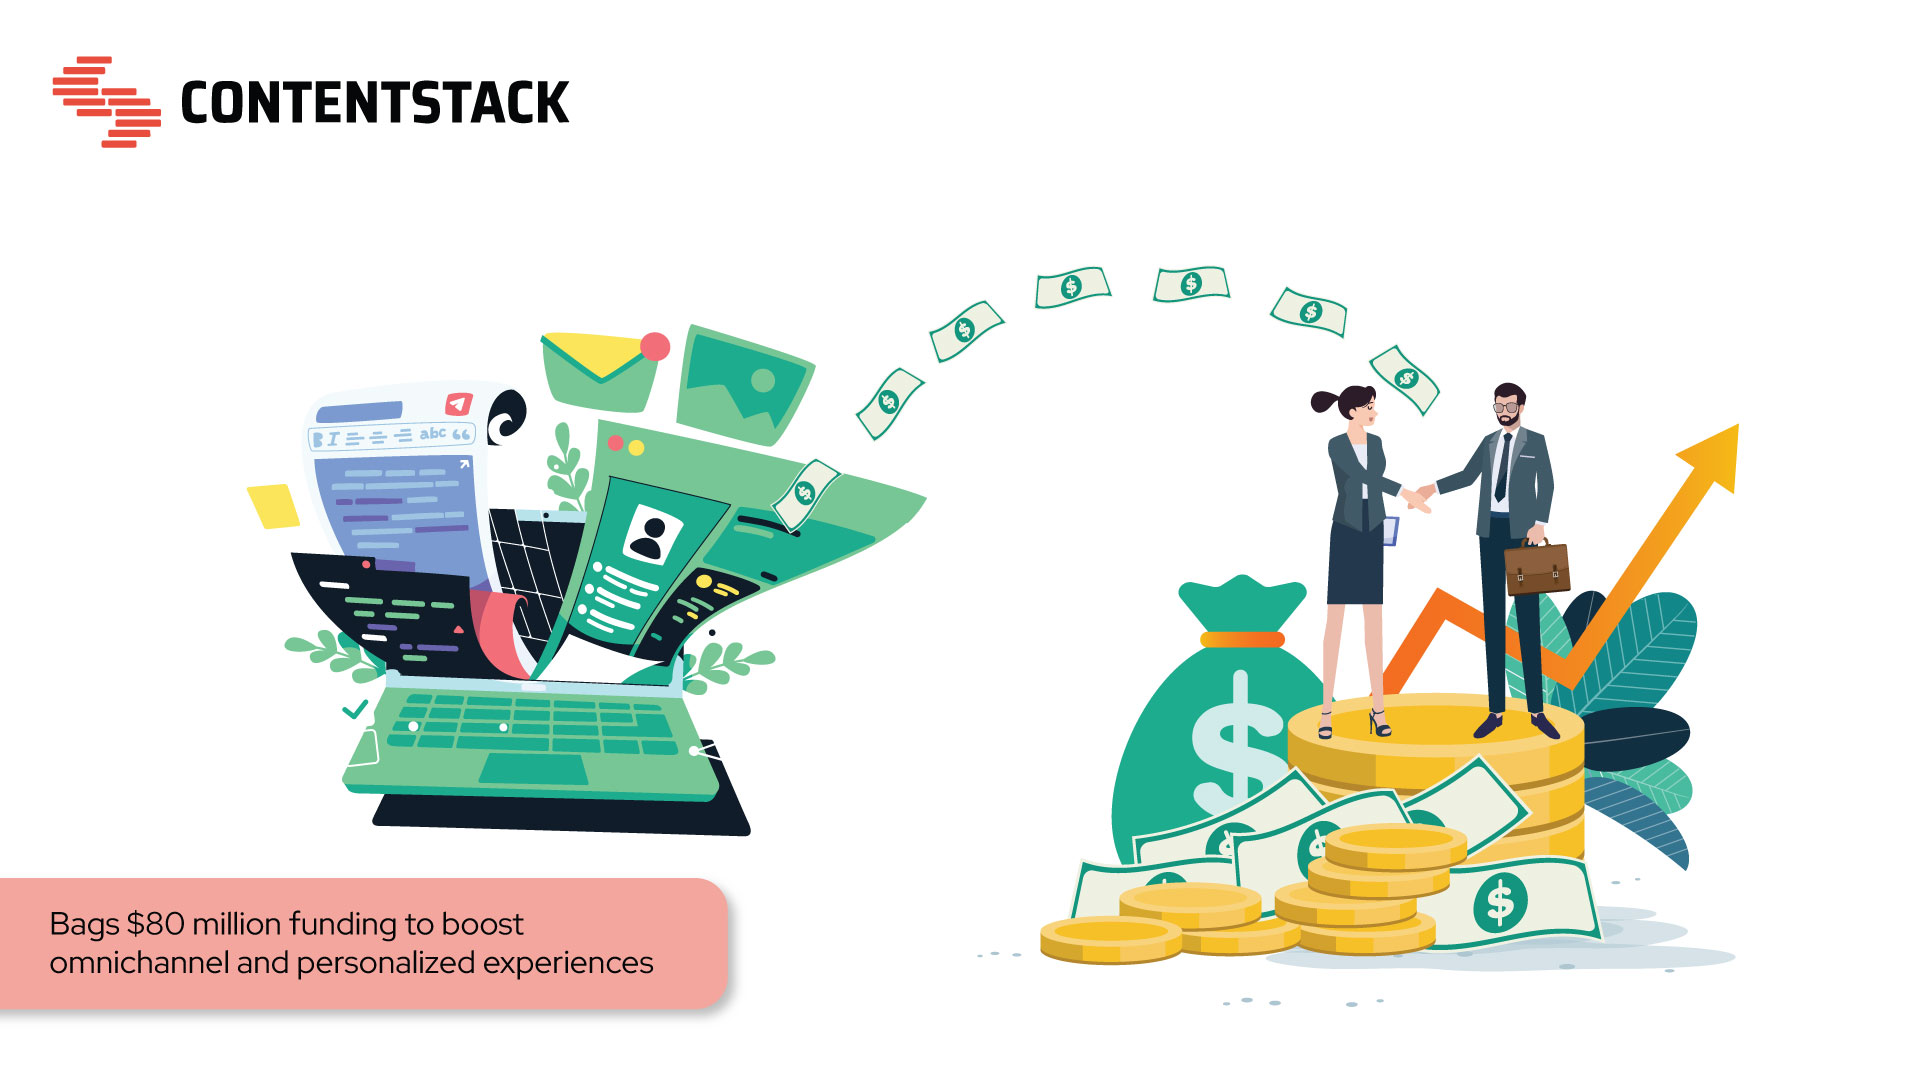 Contentstack Raises $80 Million Series C Co-Led by Georgian and Insight Partners to Accelerate the Path to Composable for Enterprise